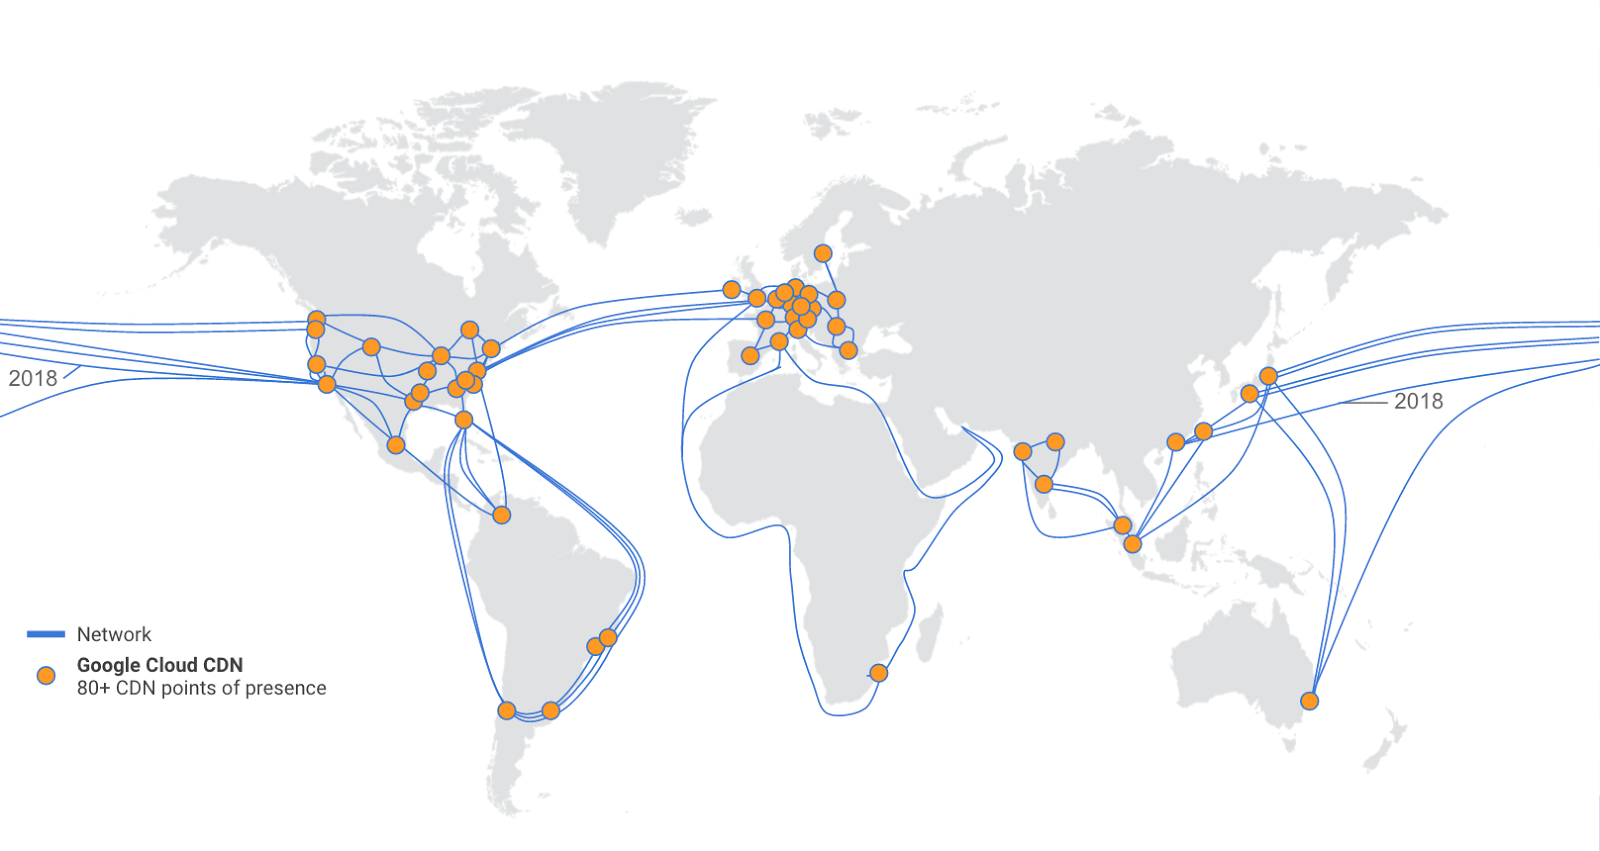 Google Cloud CDN image displaying over 80 CDN points of presence on the world map